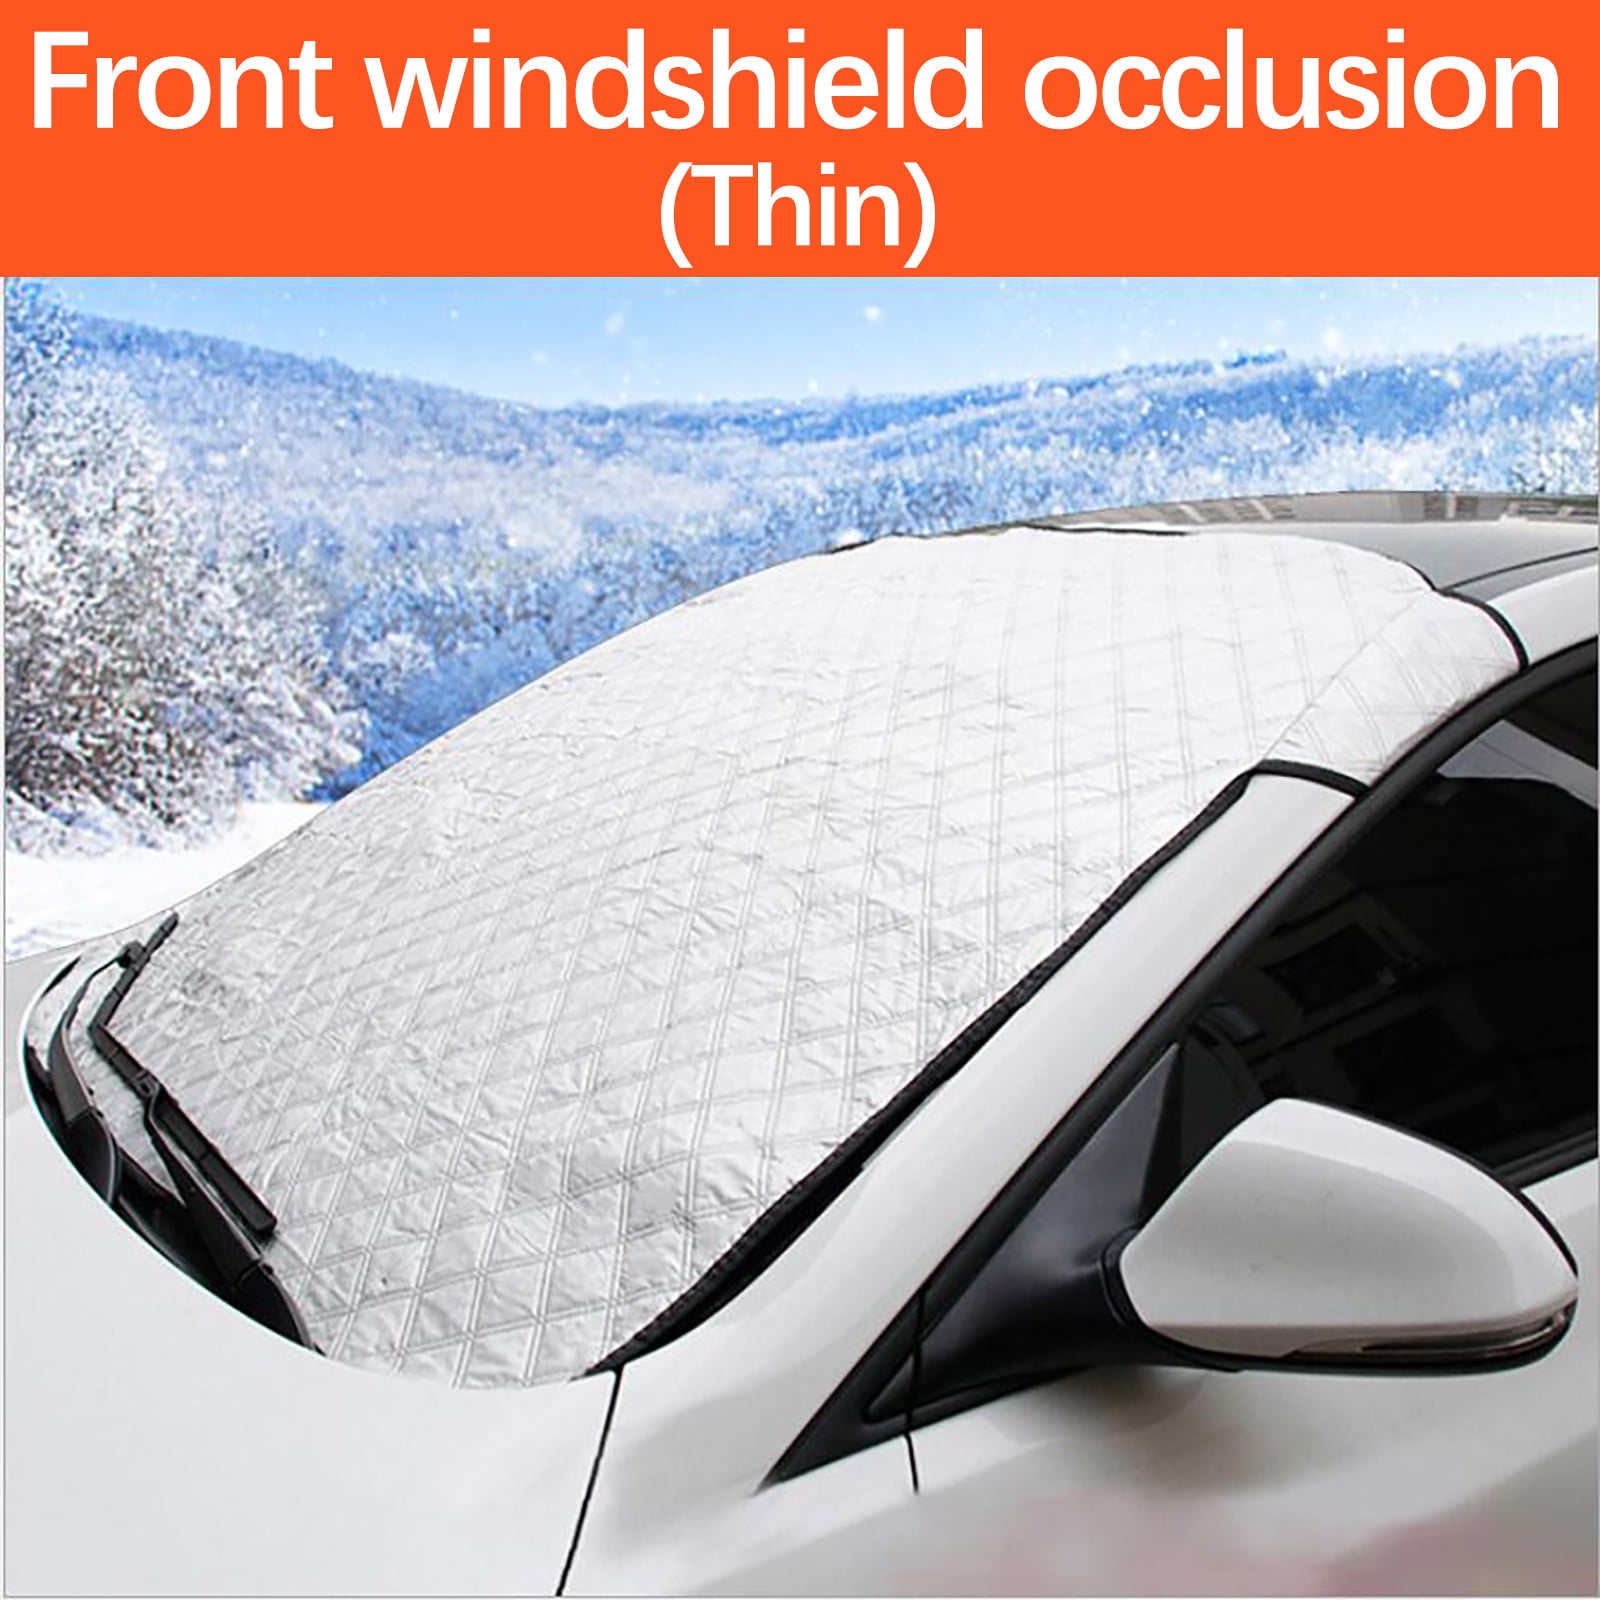 1xCar Windshield Cover Sun Shade Protector Winter Ice Rain Dust Frost Guard 